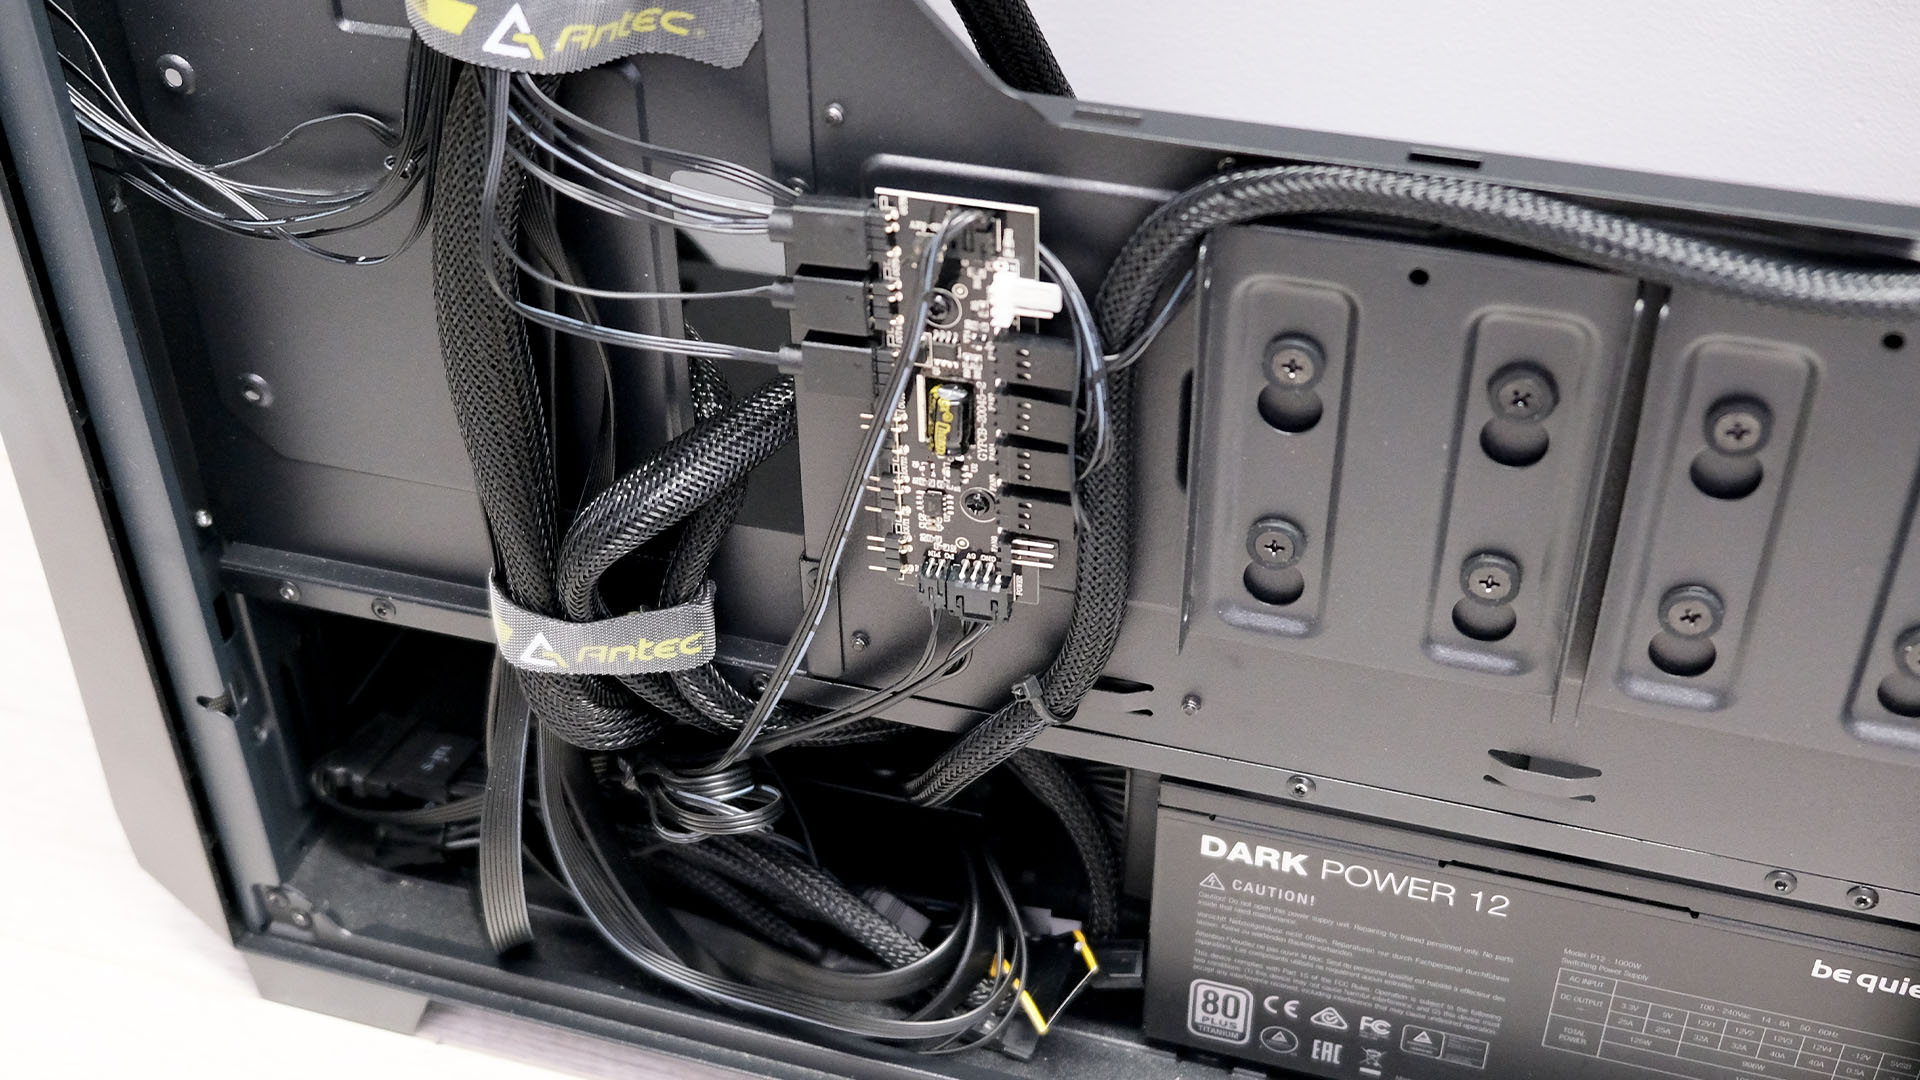 Cable management guide: Use cable ties